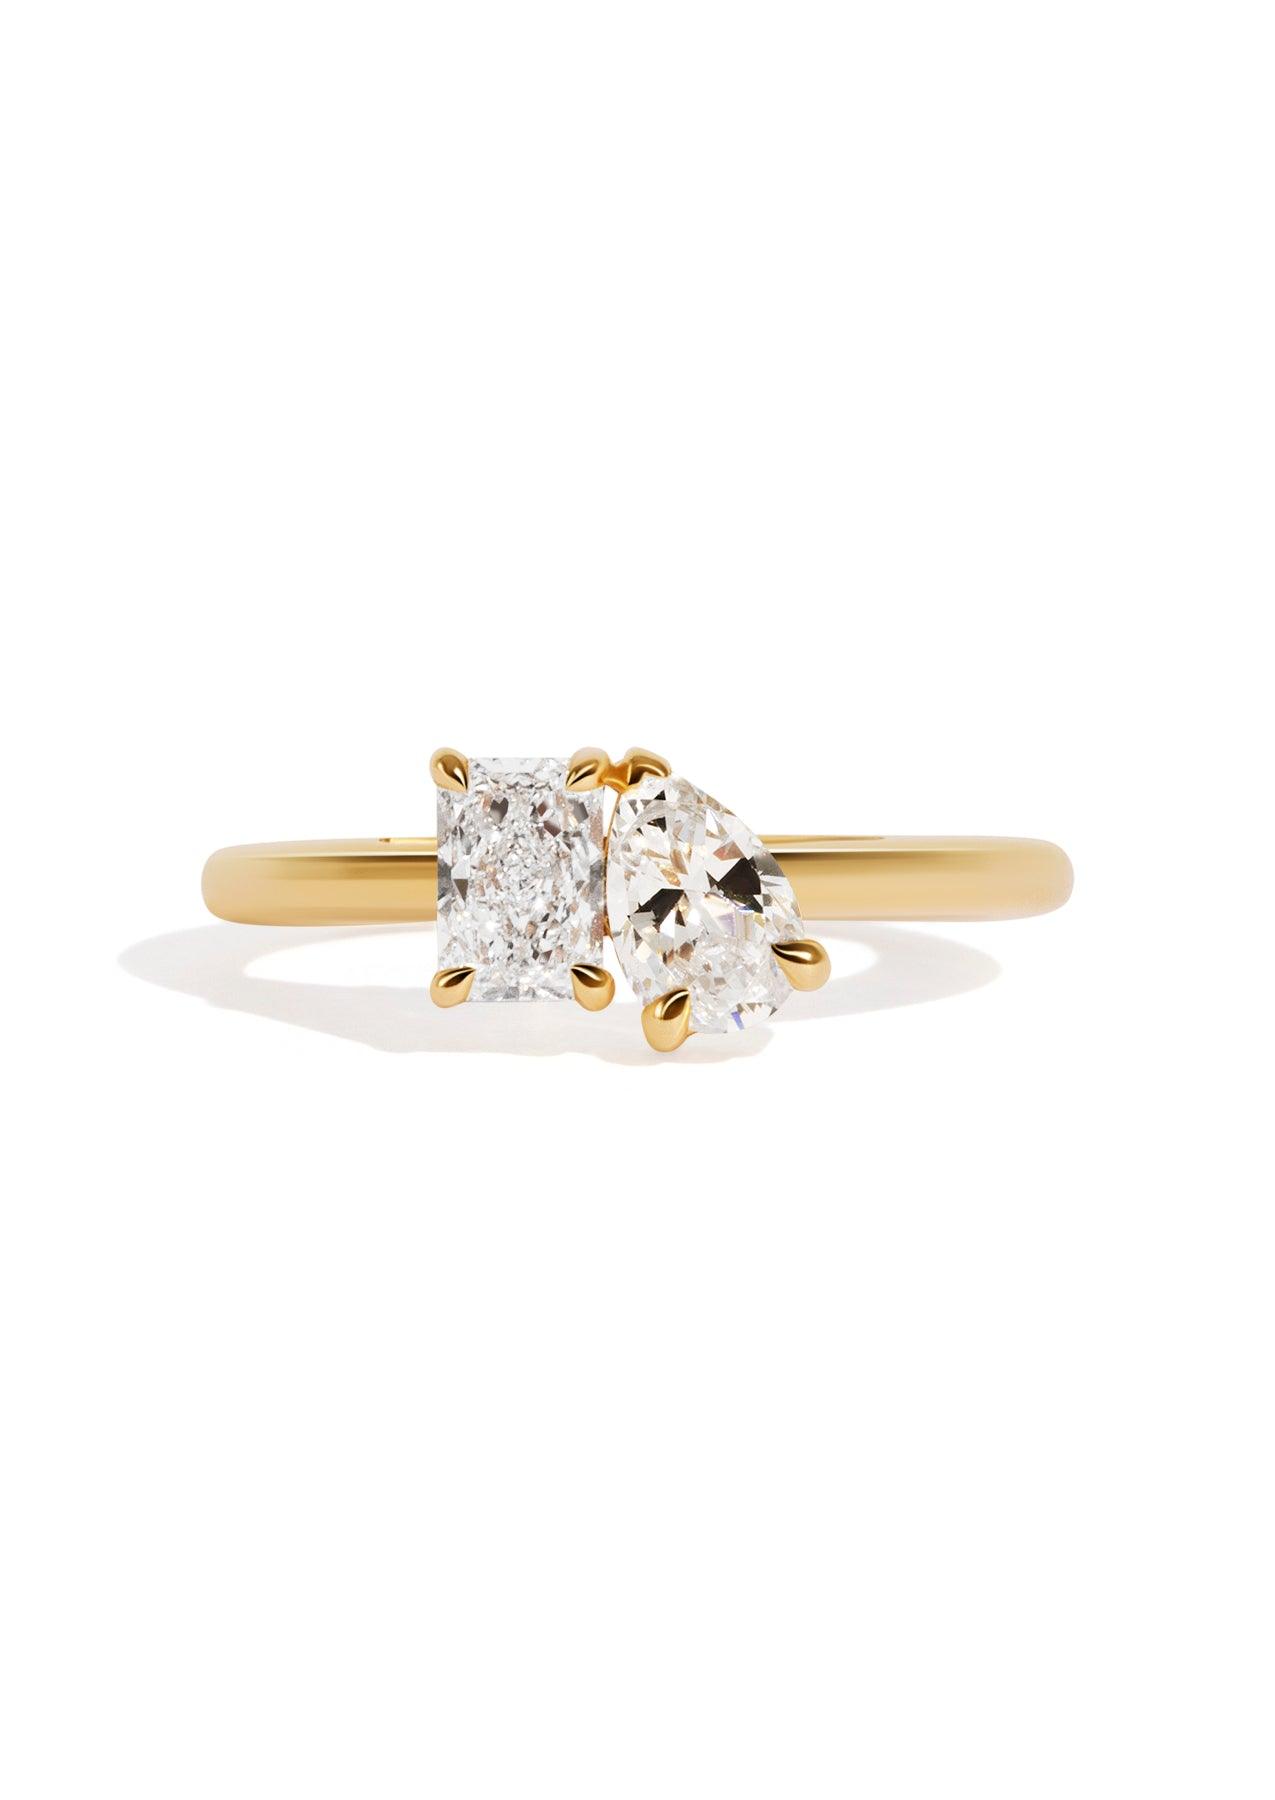 The Toi Et Moi 0.5ct Radiant and 0.5ct Pear Cultured Diamond Ring - Molten Store